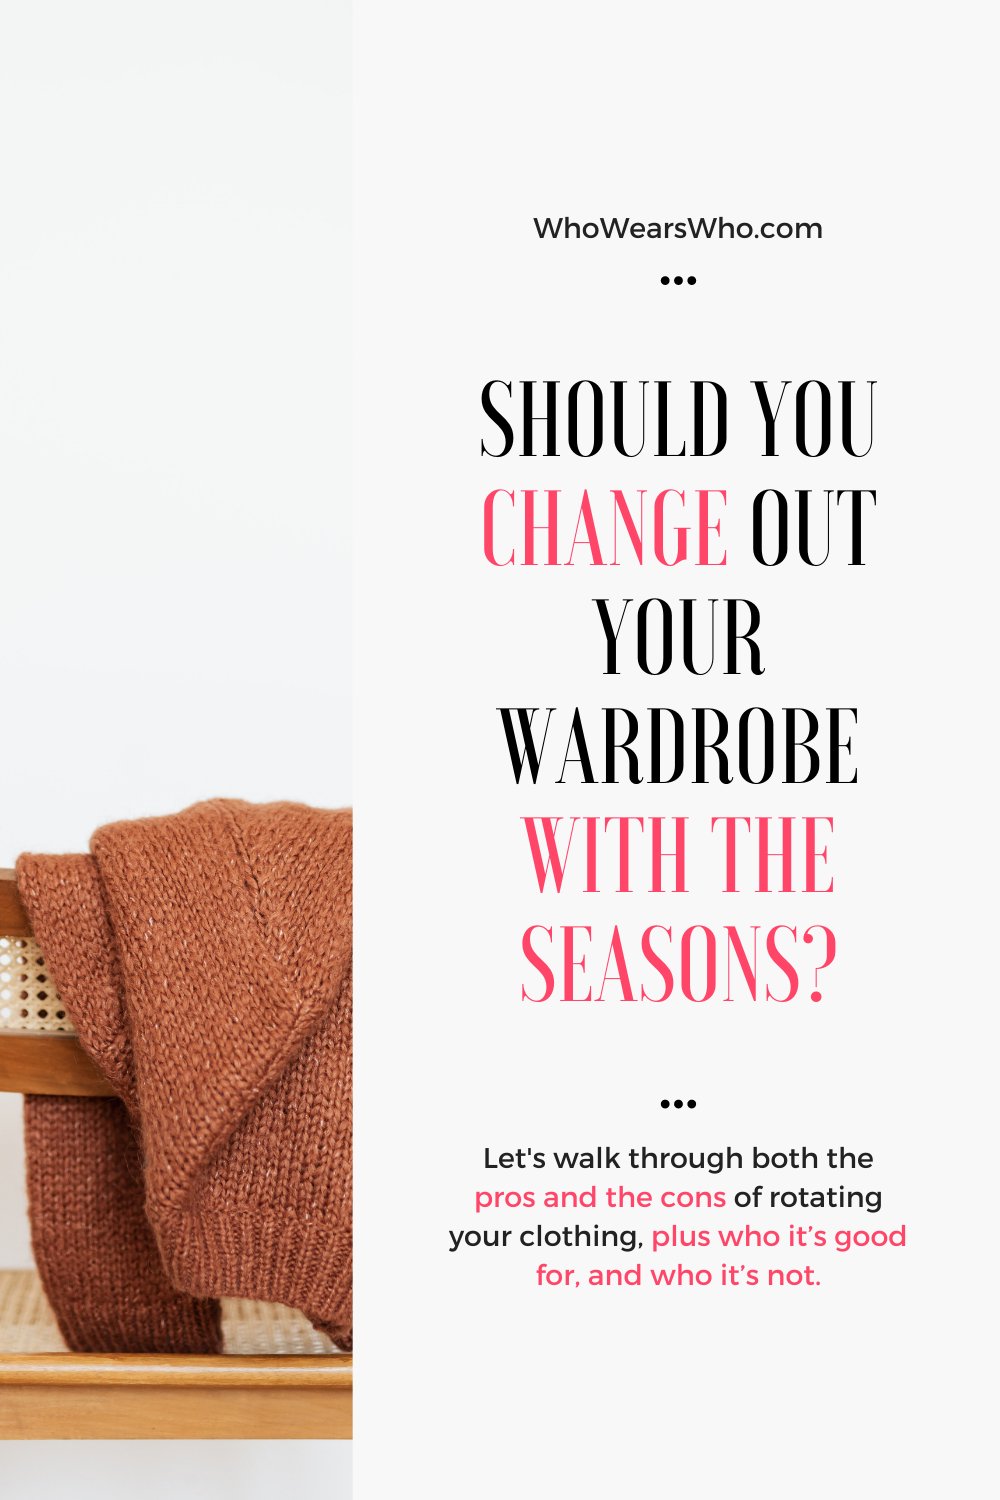 Should you change out your wardrobe with the seasons